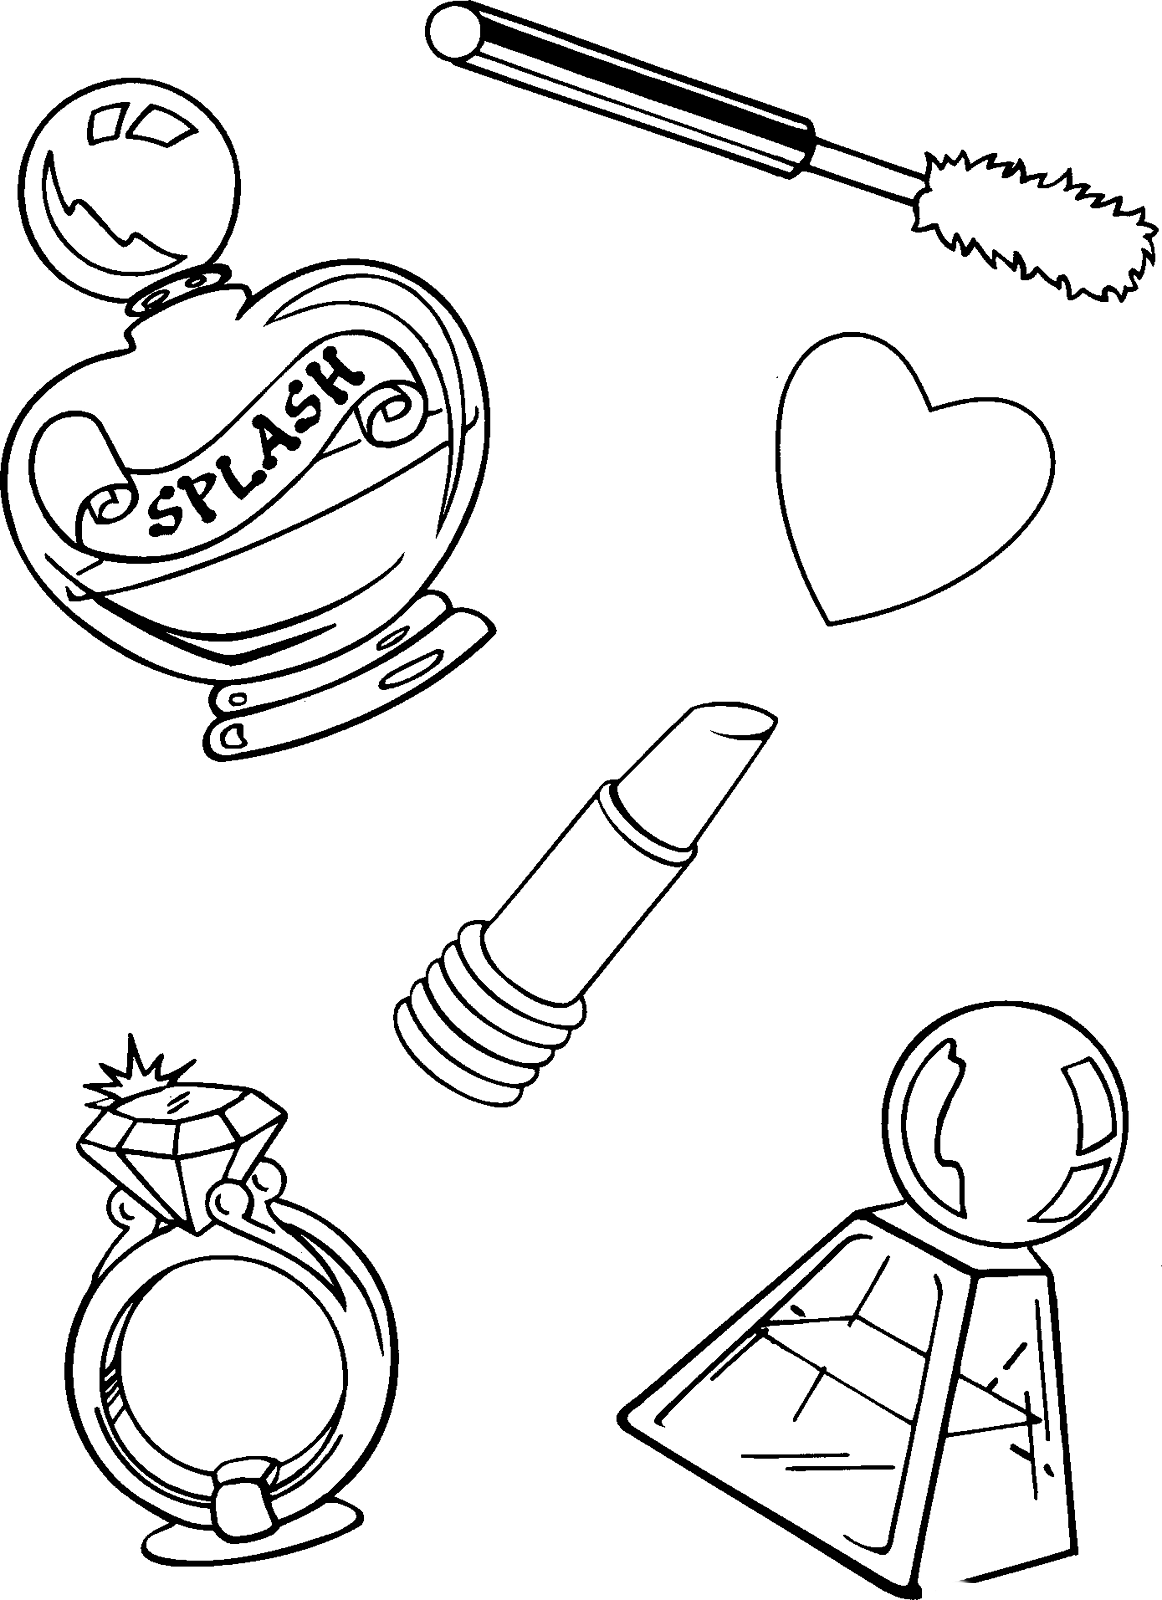 Coloring page - Cosmetics for a girl